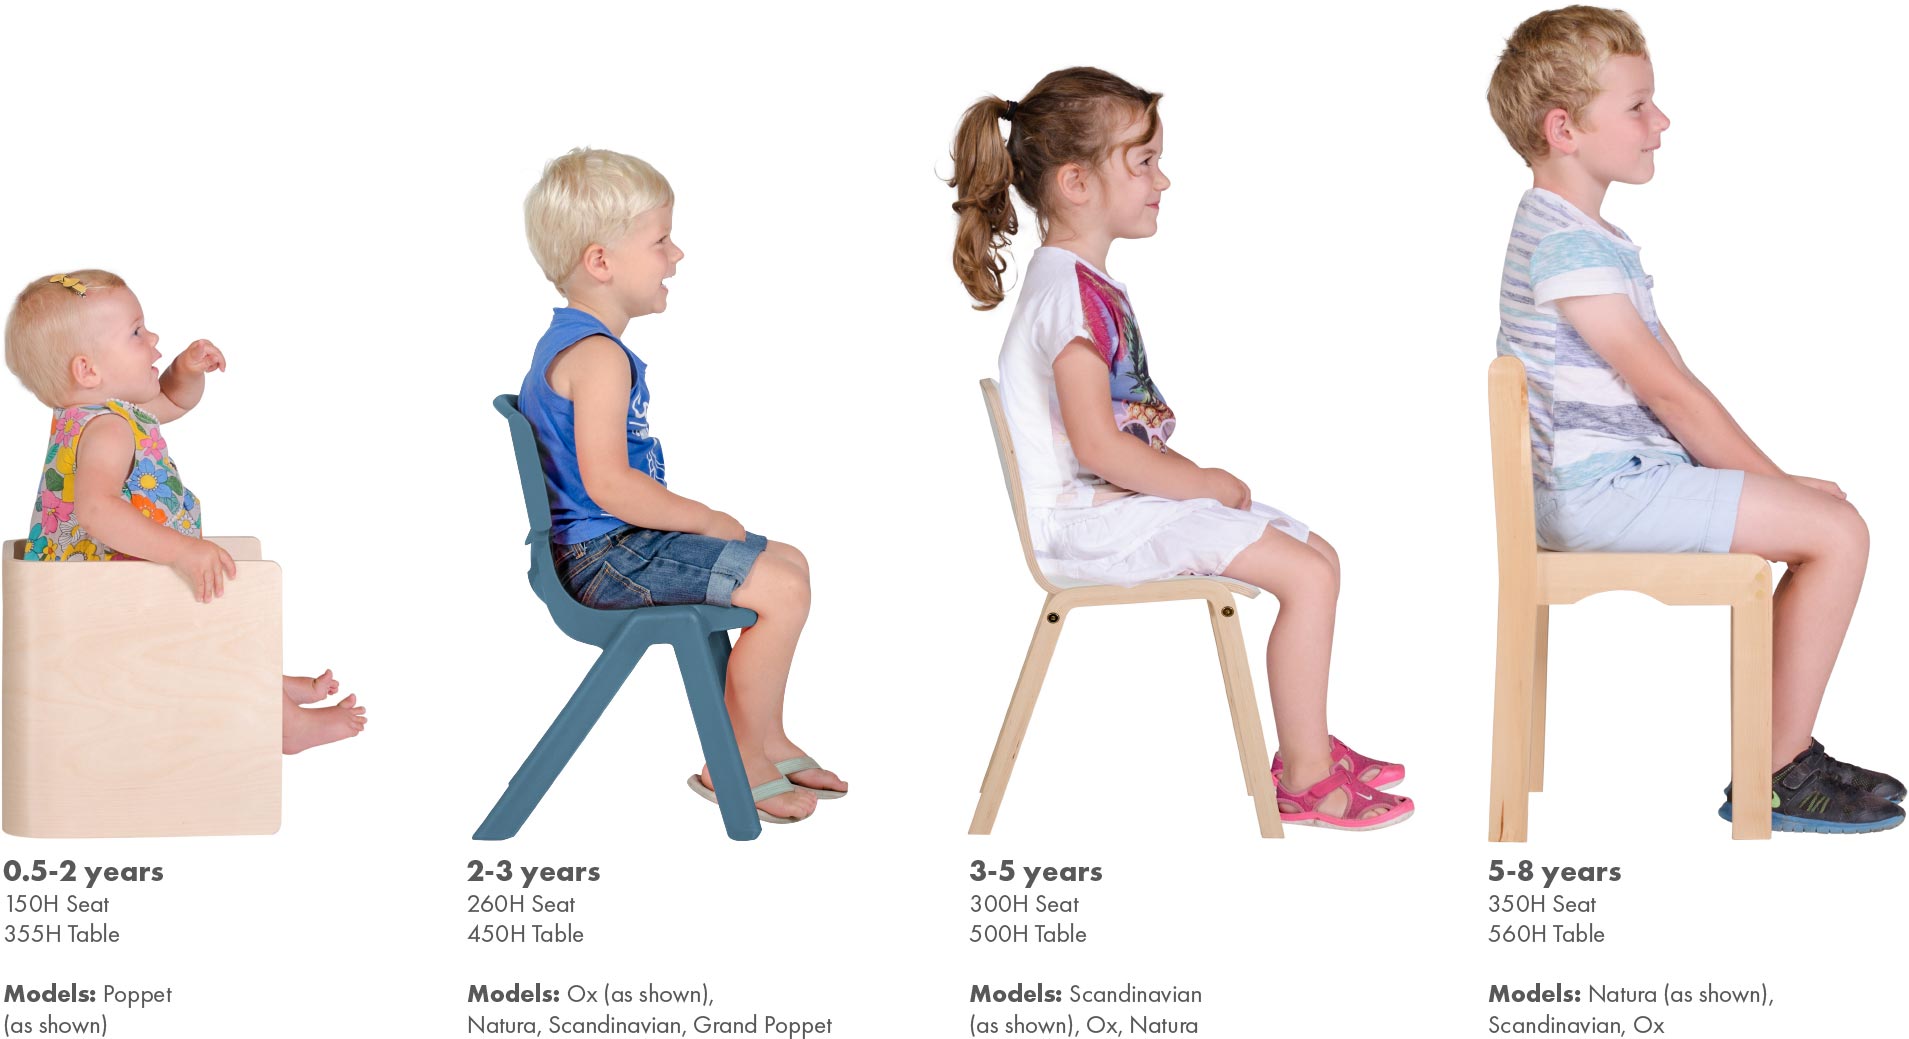 LSG age size guide for chairs